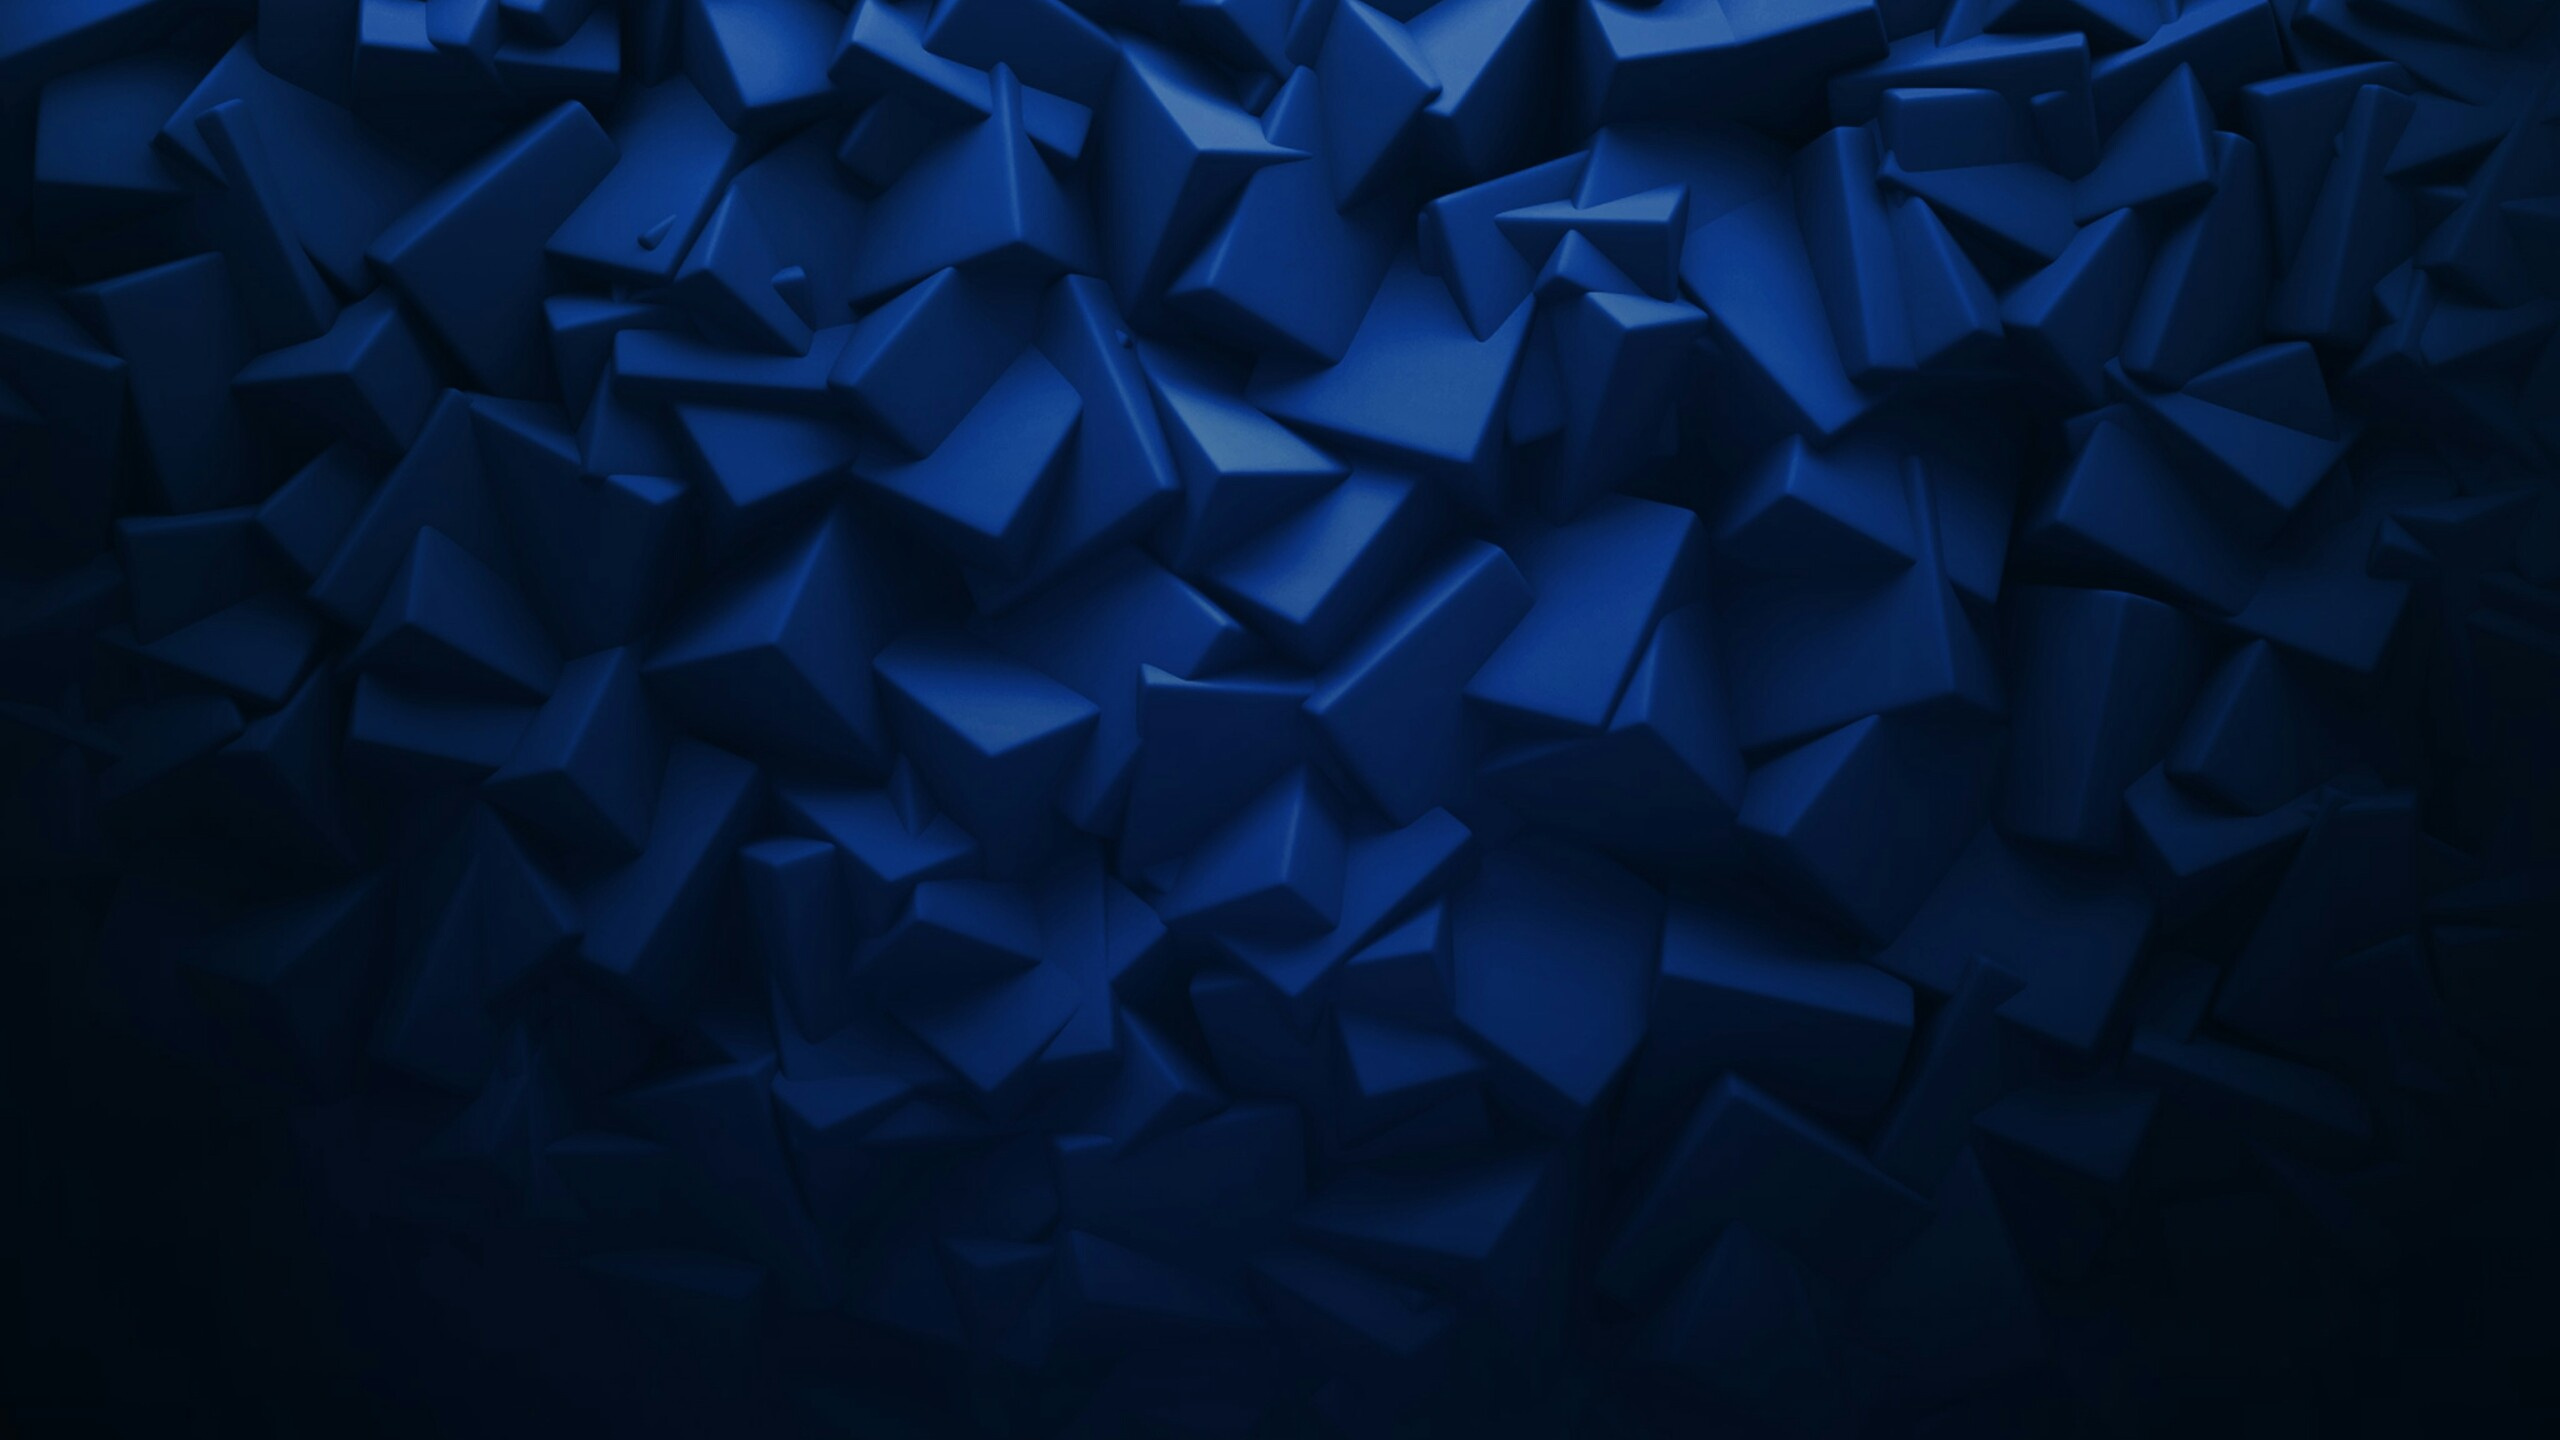 Blue and White Star Illustration. Wallpaper in 2560x1440 Resolution